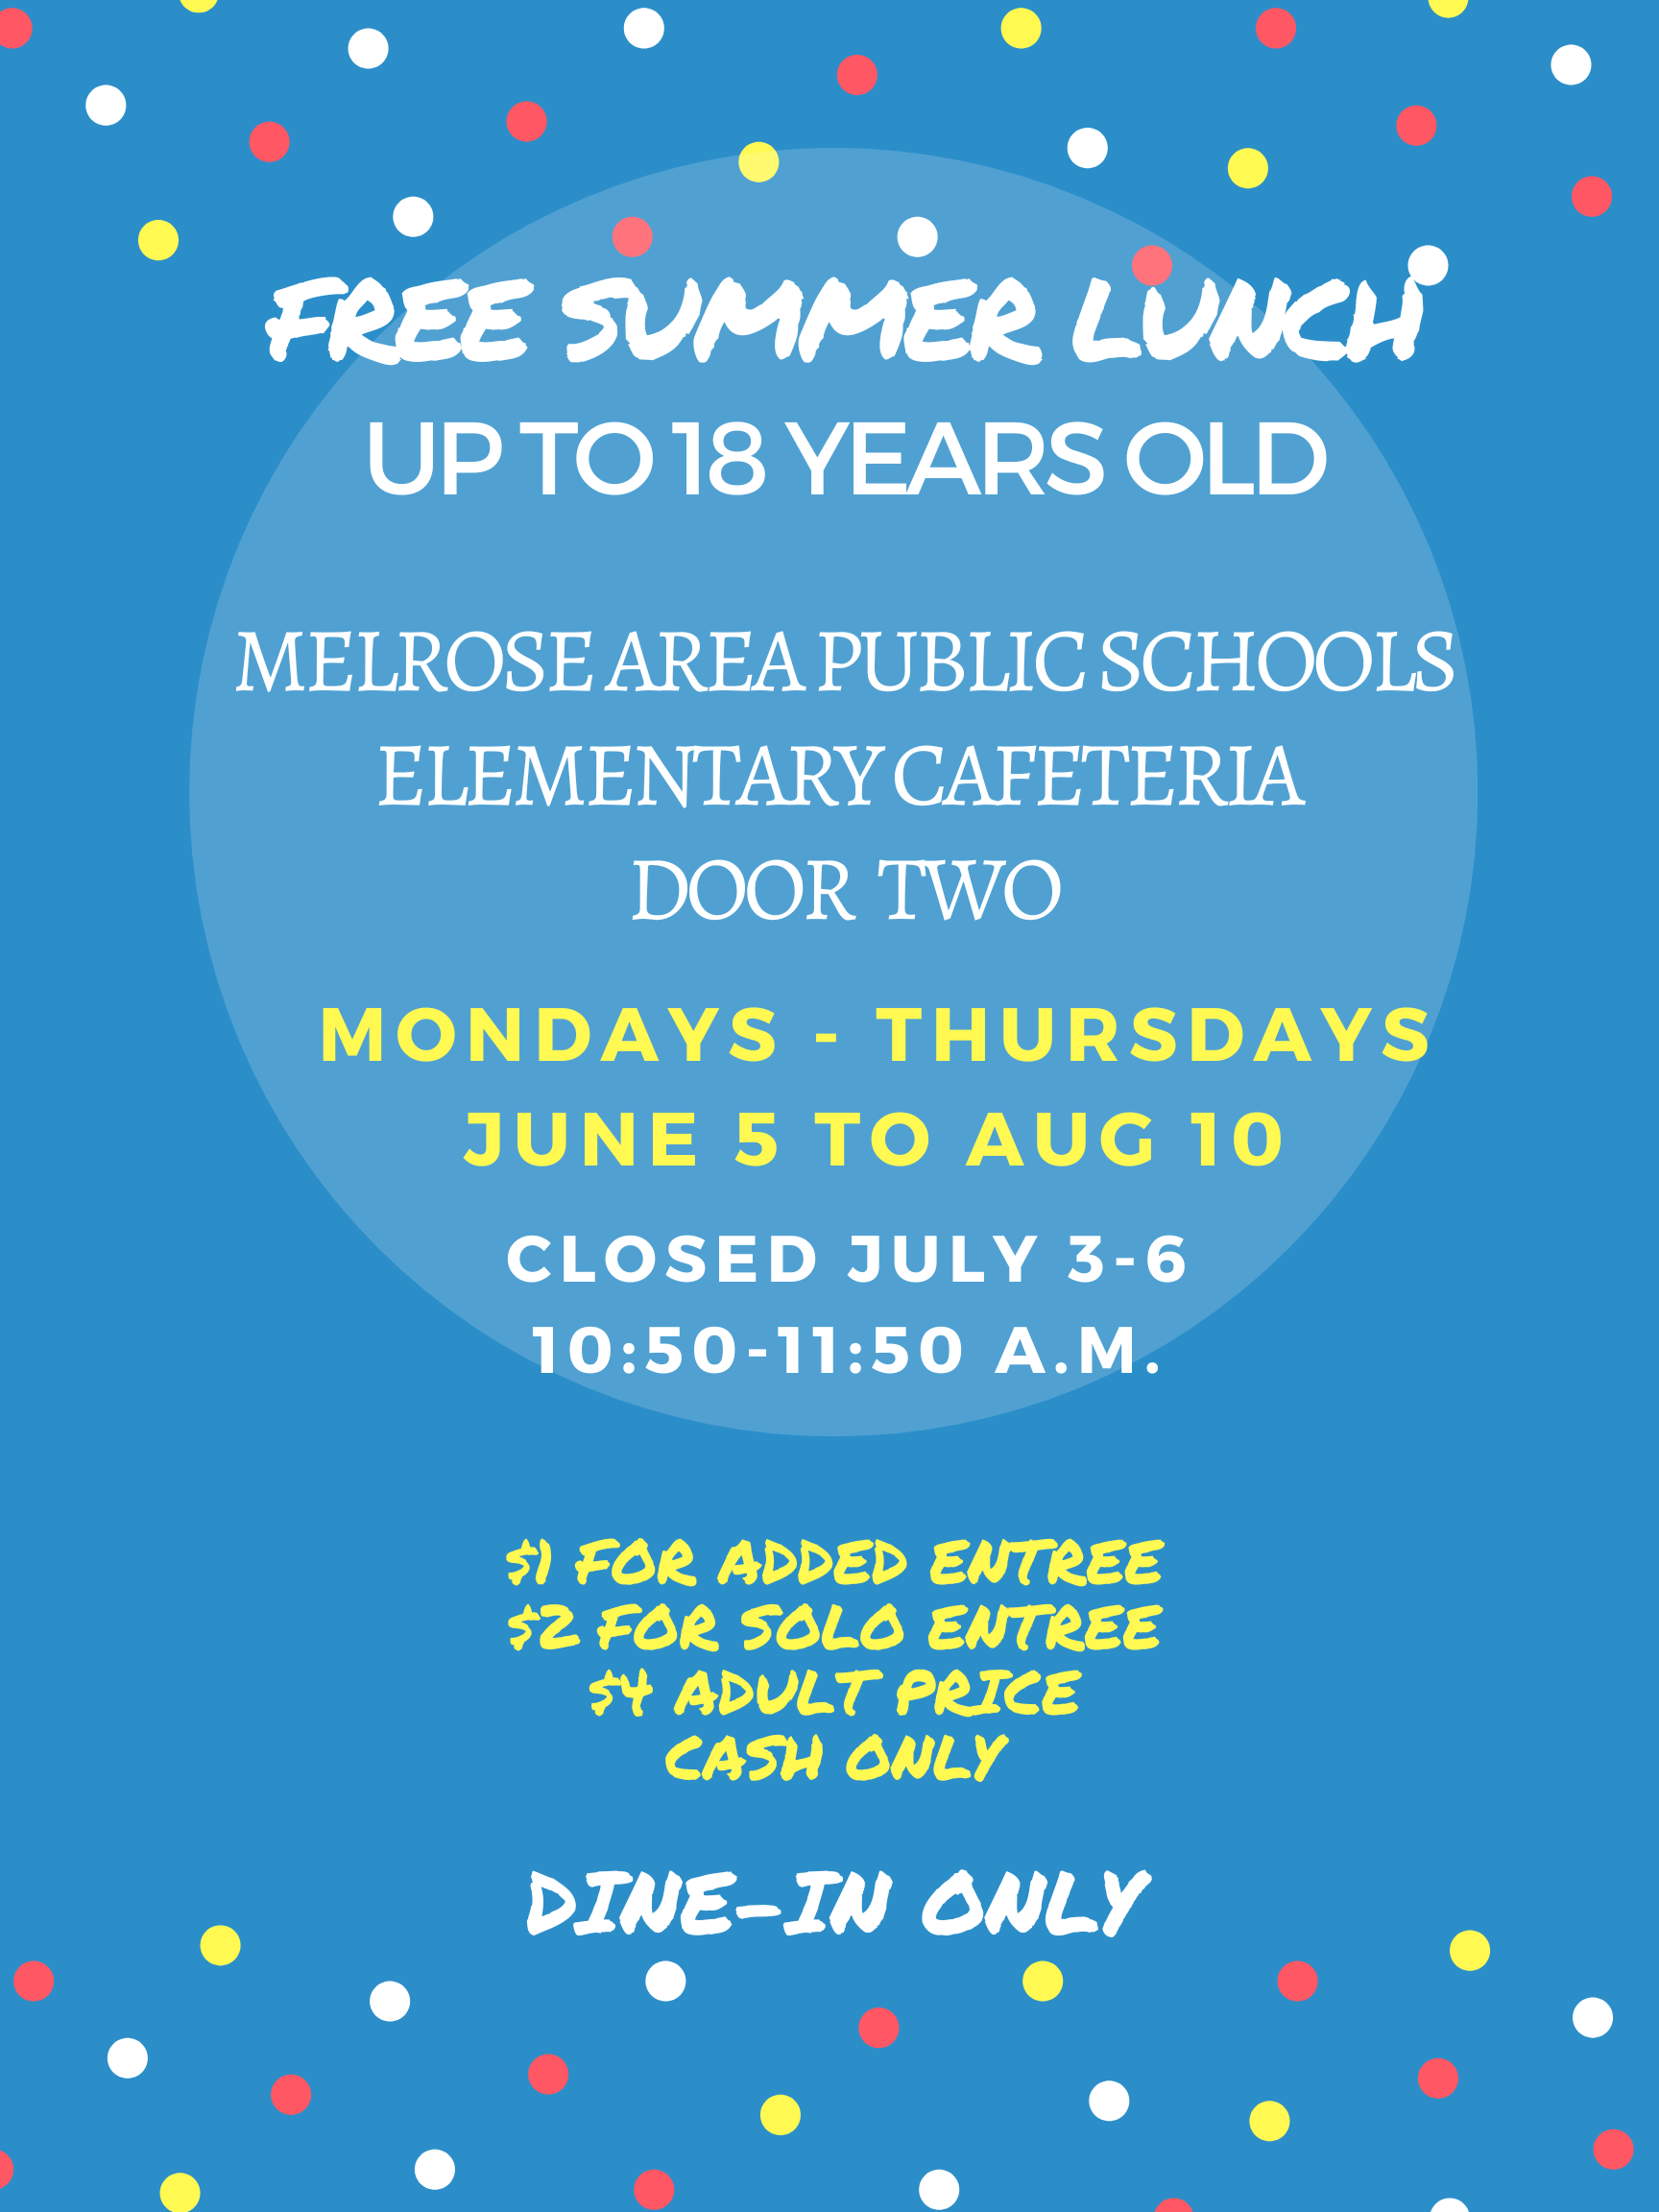 Summer Lunch ProgramFREE SUMMER LUNCH UP TO 18 YEARS OLD MELROSE AREA PUBLIC SCHOOLS ELEMENTARY CAFETERIA DOOR TWO MOndAYS - THursdAyS JUNE 5 TO AUG 10 CloseD JULY 3-6 10:50-11:50 A.M. S) FOR ADDED ENTREE 52 FOR SOLO ENTREE 54 ADULT PRICE CASH ONLY DINE-IN ONLY